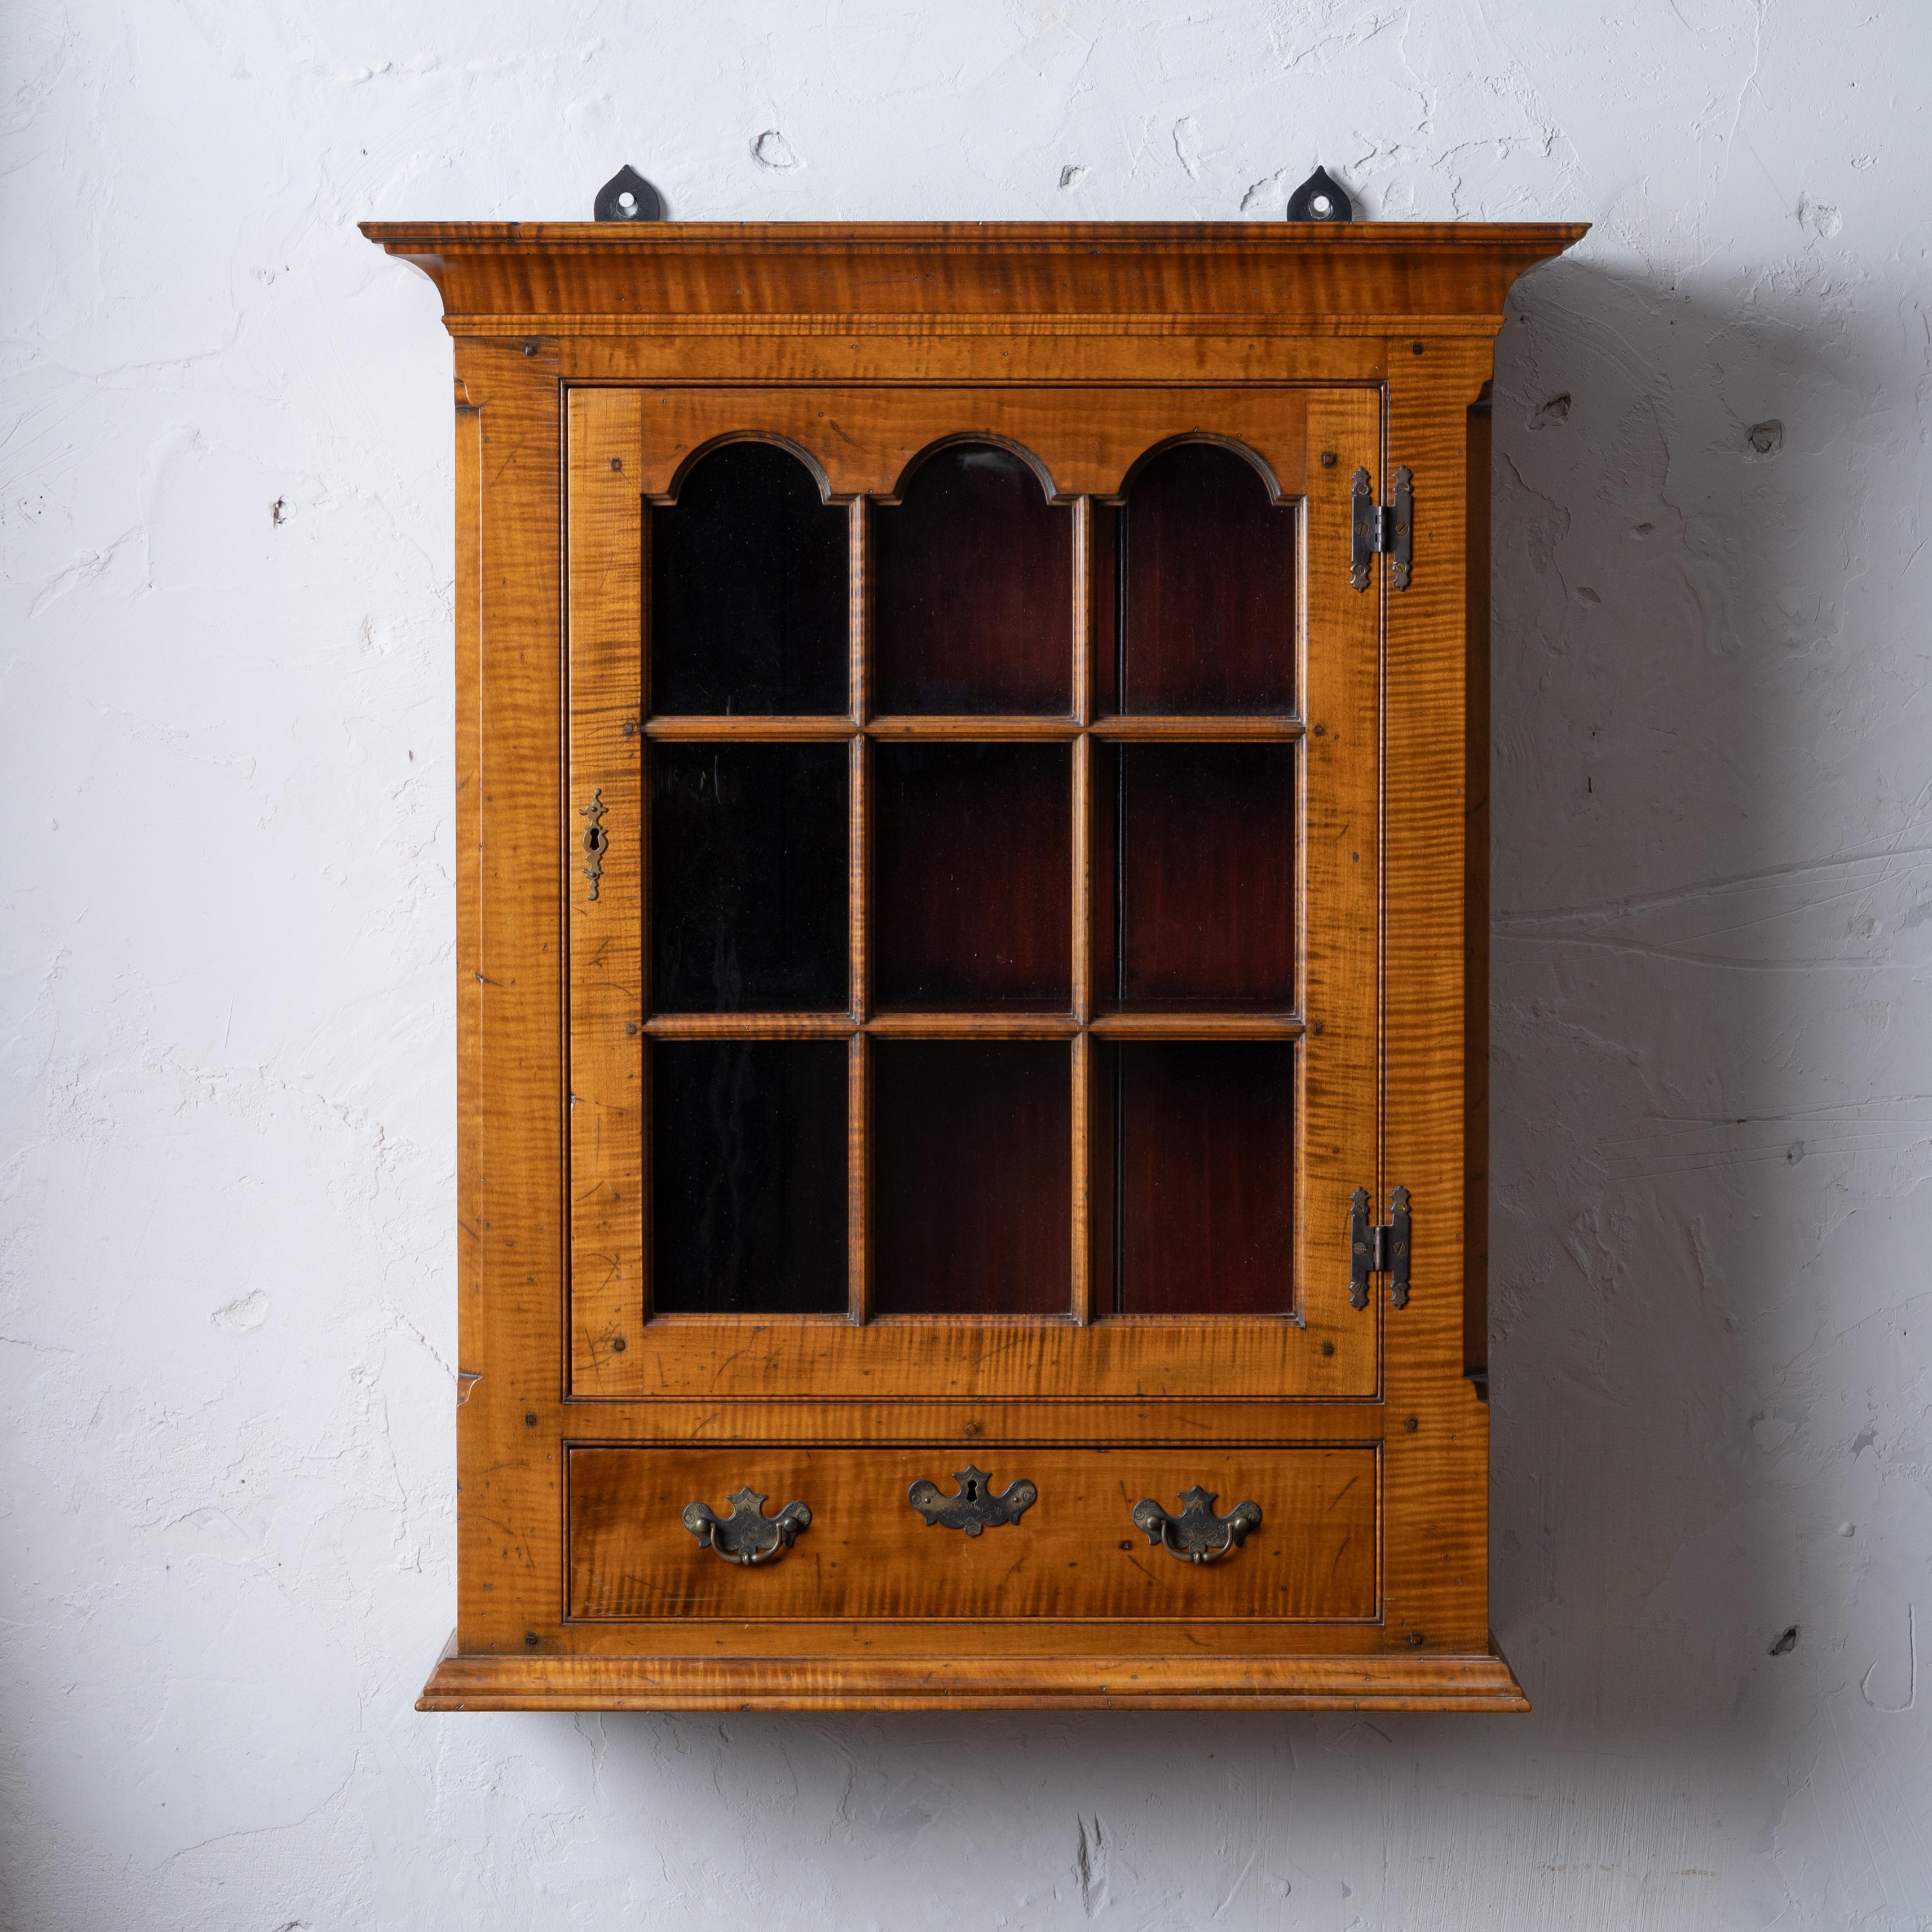 George Beshore

(Missouri/Pennsylvania, 1925-2021)

A benchmade curly maple hanging cupboard in the manner of Chippendale, 1992.

Drawer inscribed “made by G. Beshore, 11/92”.

26 ¾ inches wide by 10 ¼ inches deep by 32 ½ inches tall

